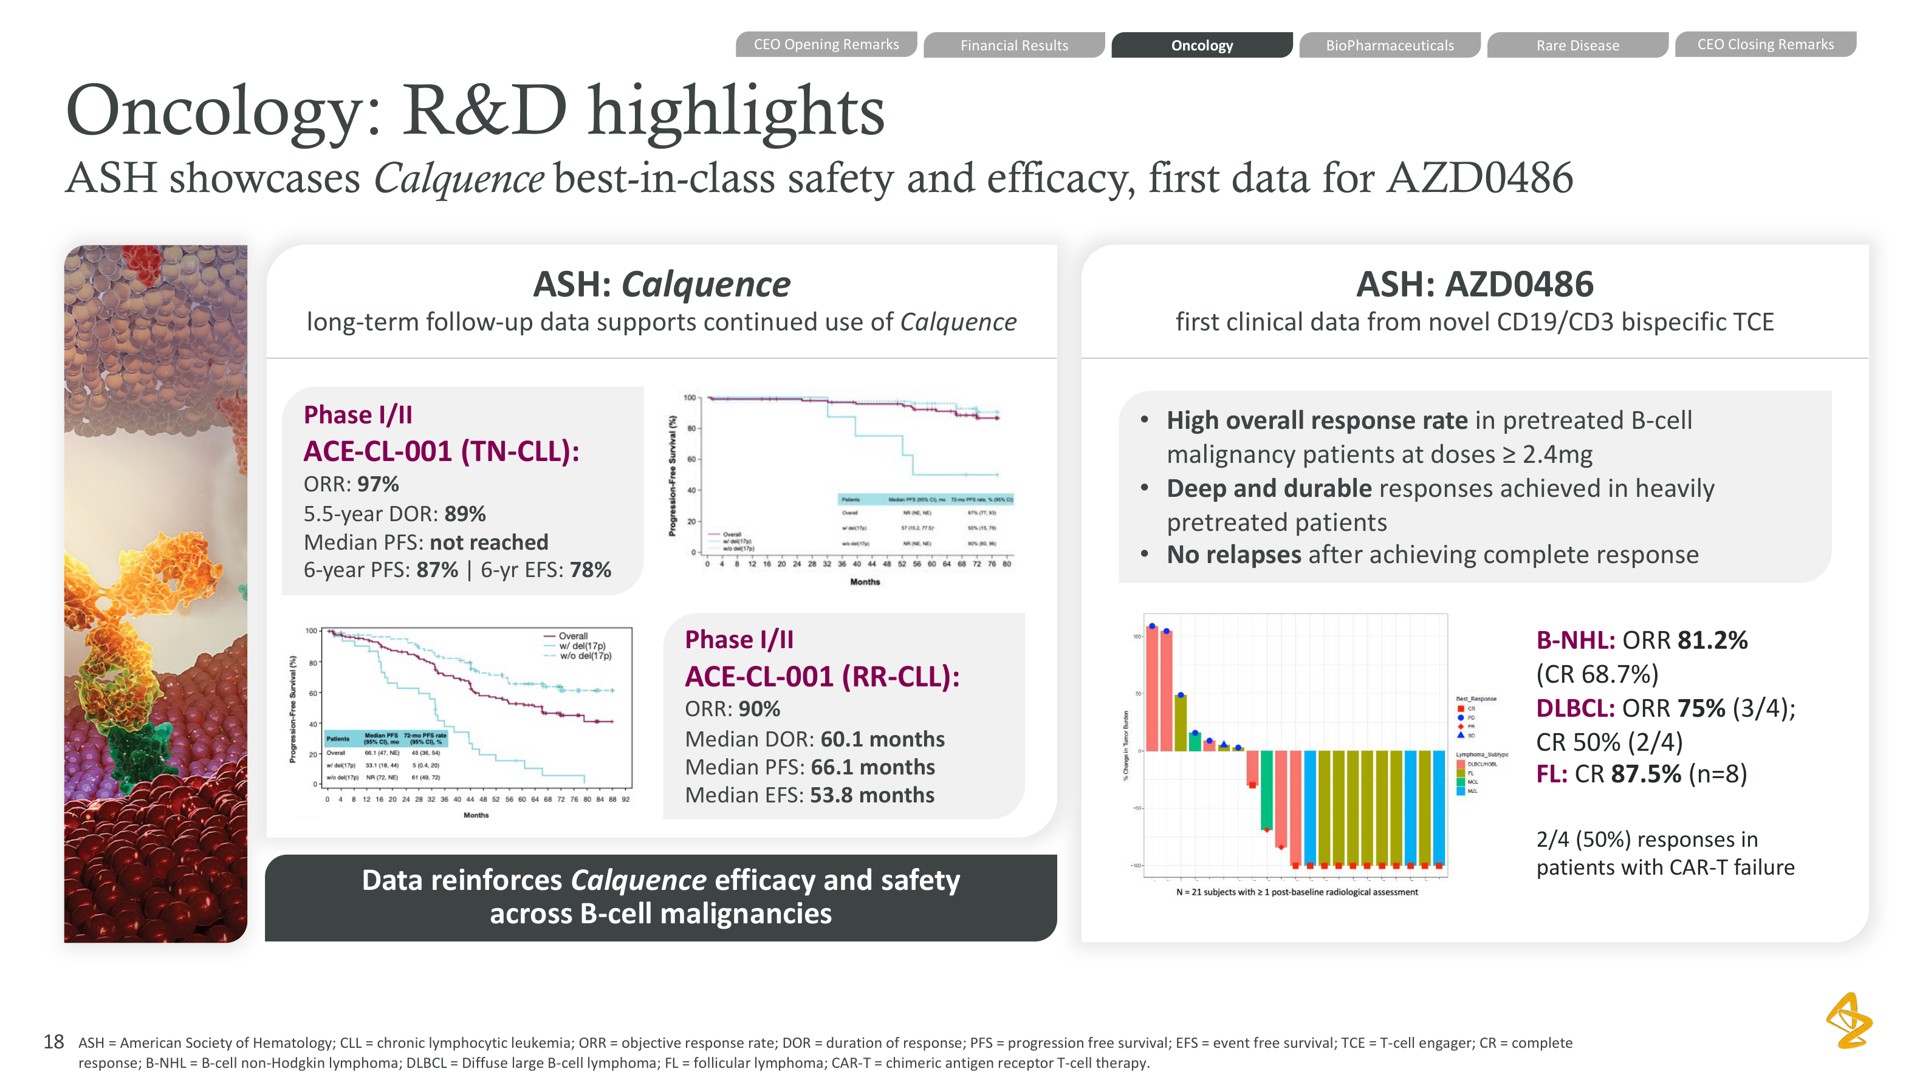 oncology highlights ash showcases best in class safety and efficacy first data for ash ash ace ace data reinforces efficacy and safety across cell malignancies phase i | AstraZeneca